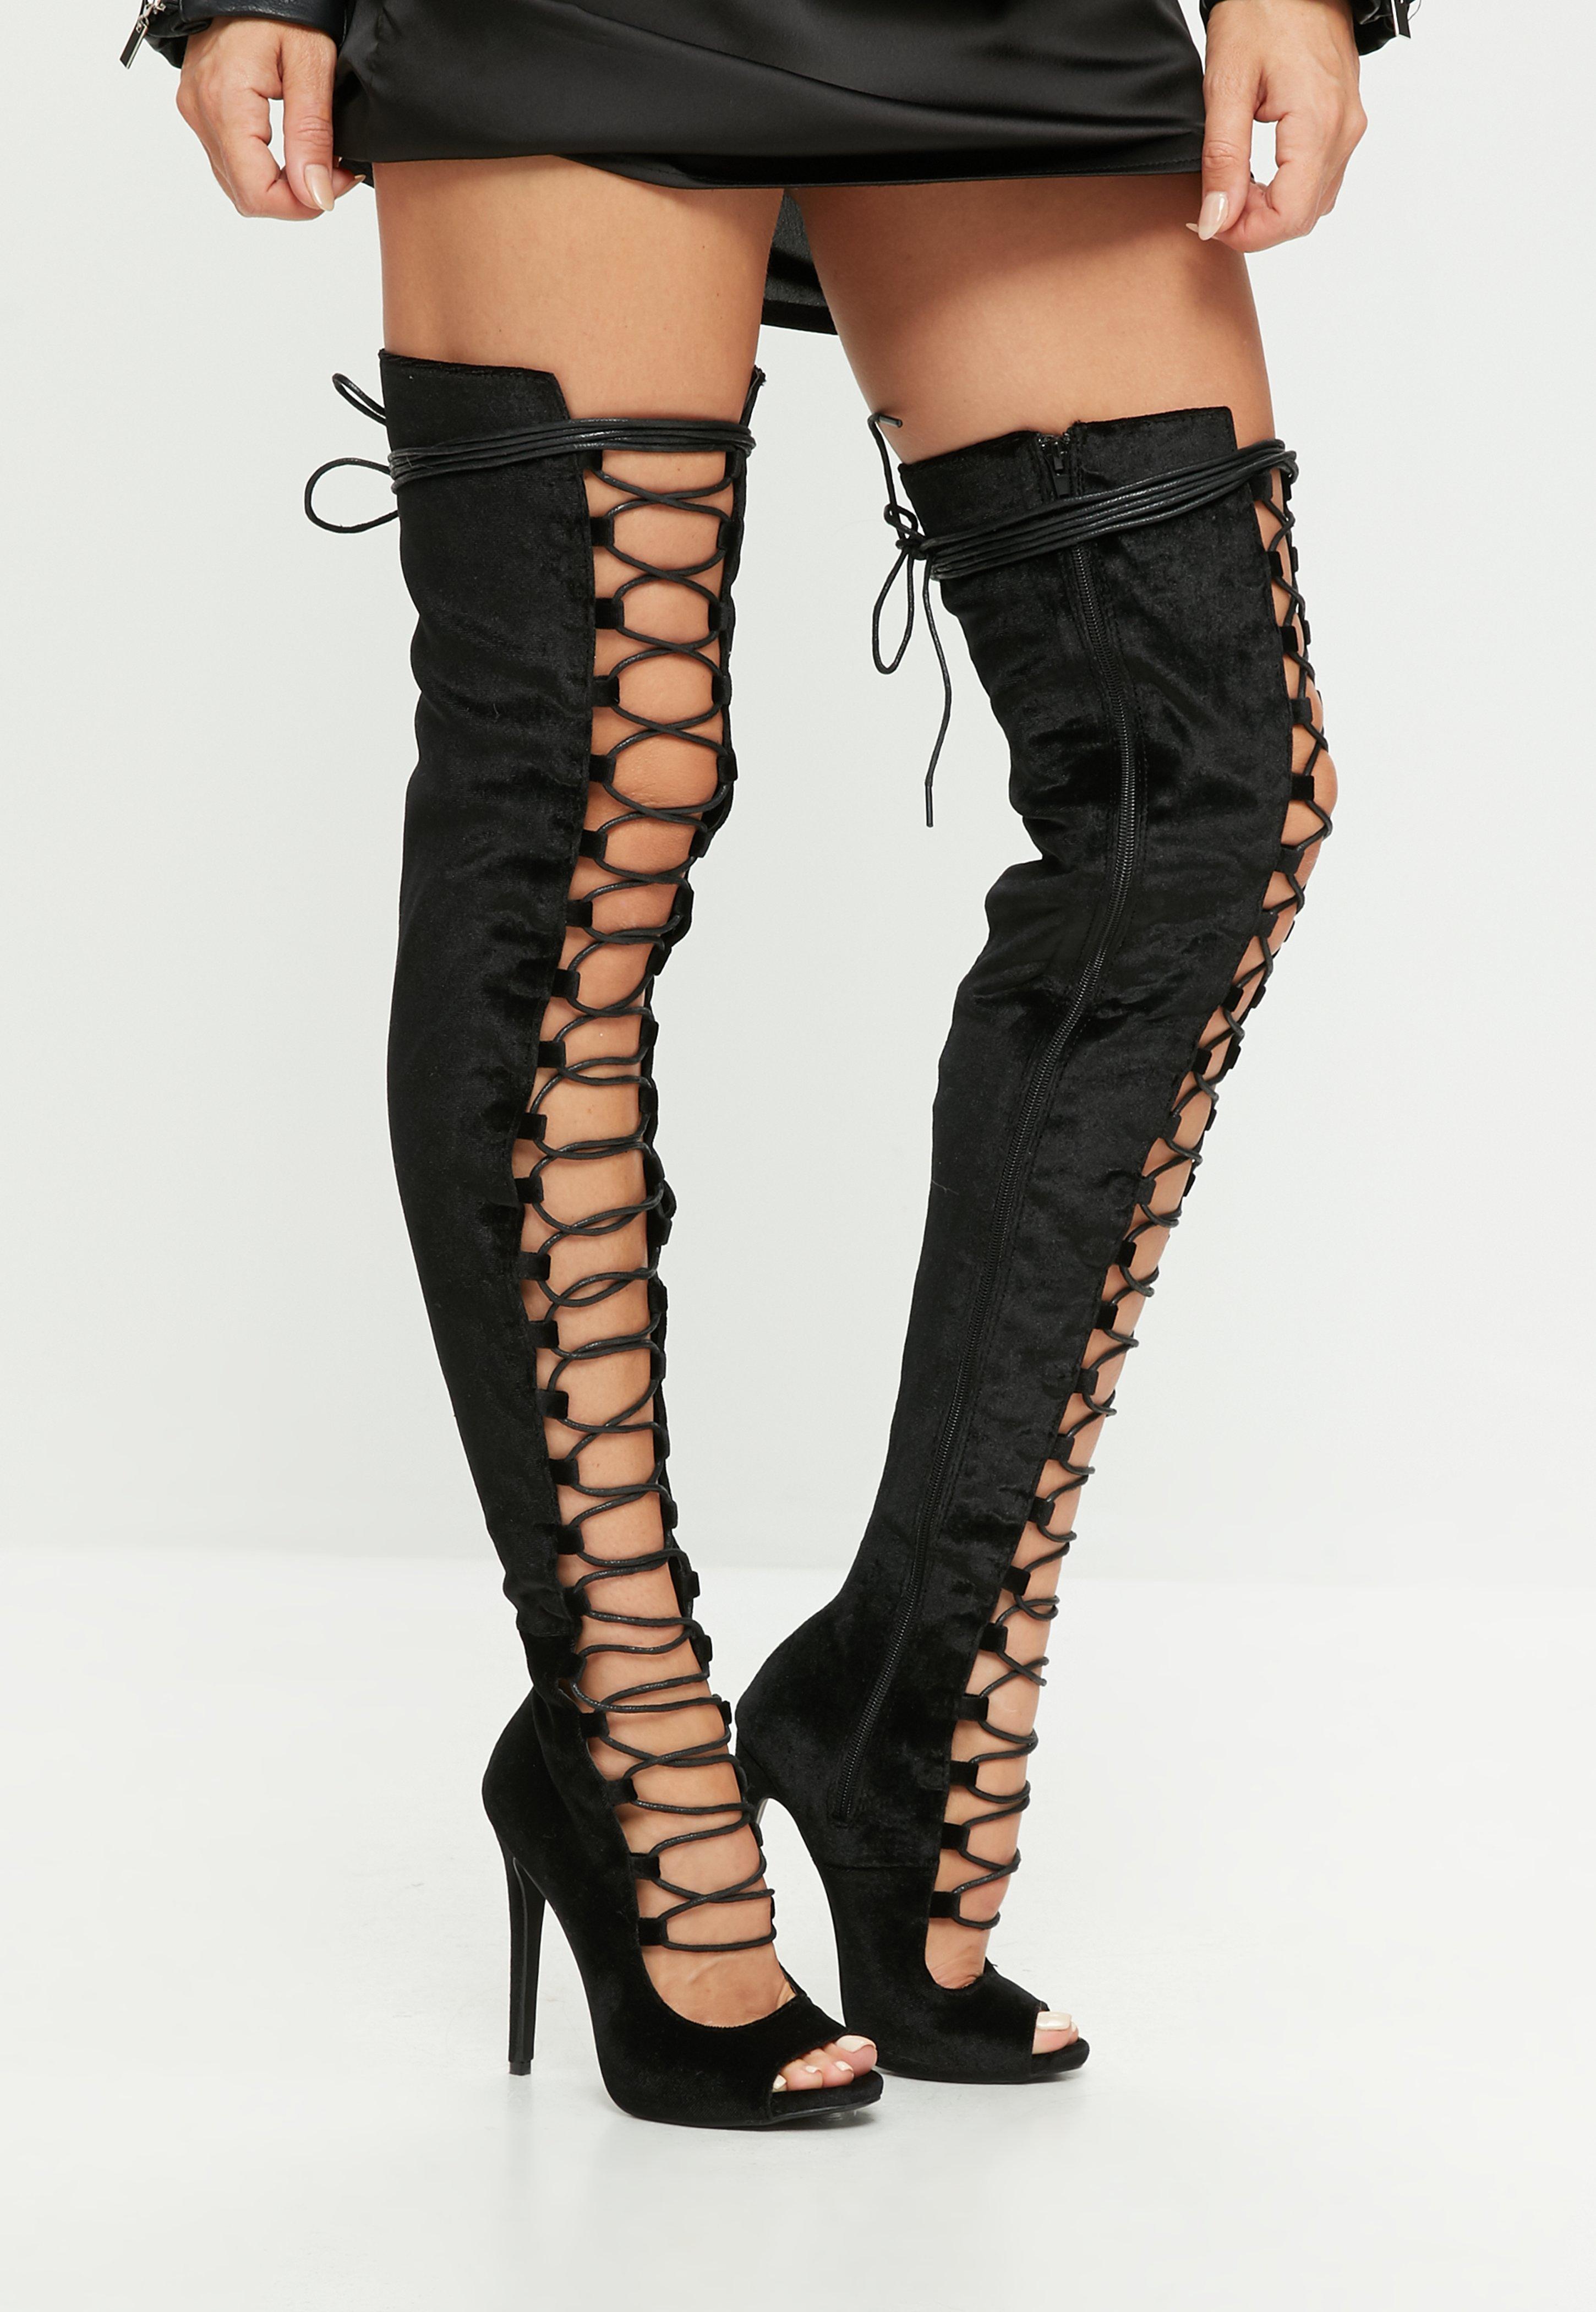 Black Lace Up Peep Toe Thigh High Boots